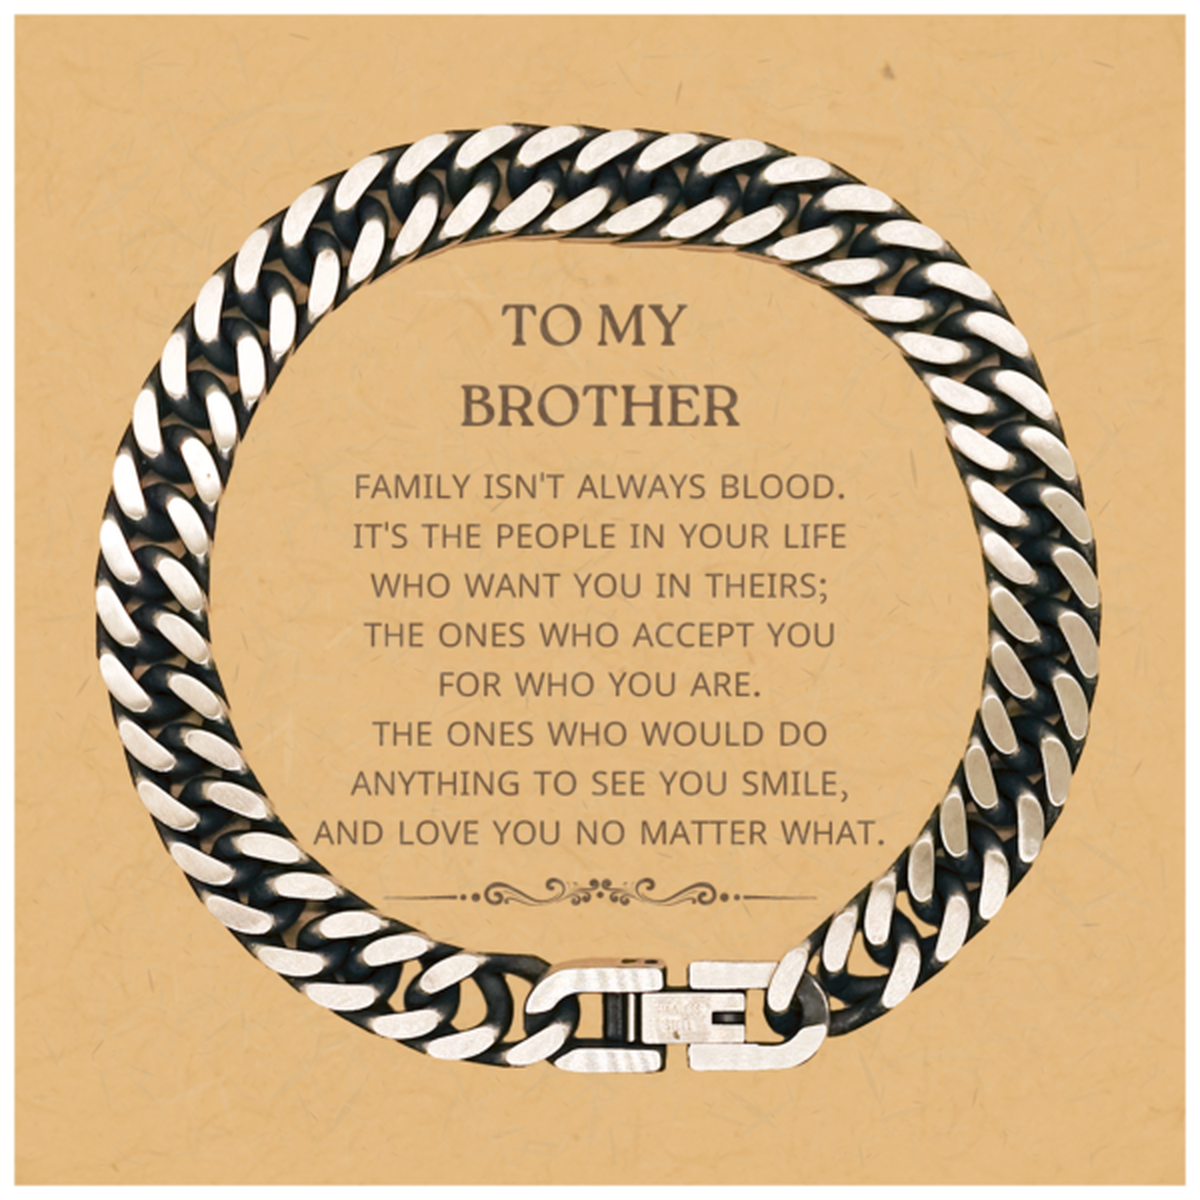 To My Brother Gifts, Family isn't always blood, Brother Cuban Link Chain Bracelet, Birthday Christmas Unique Present For Brother